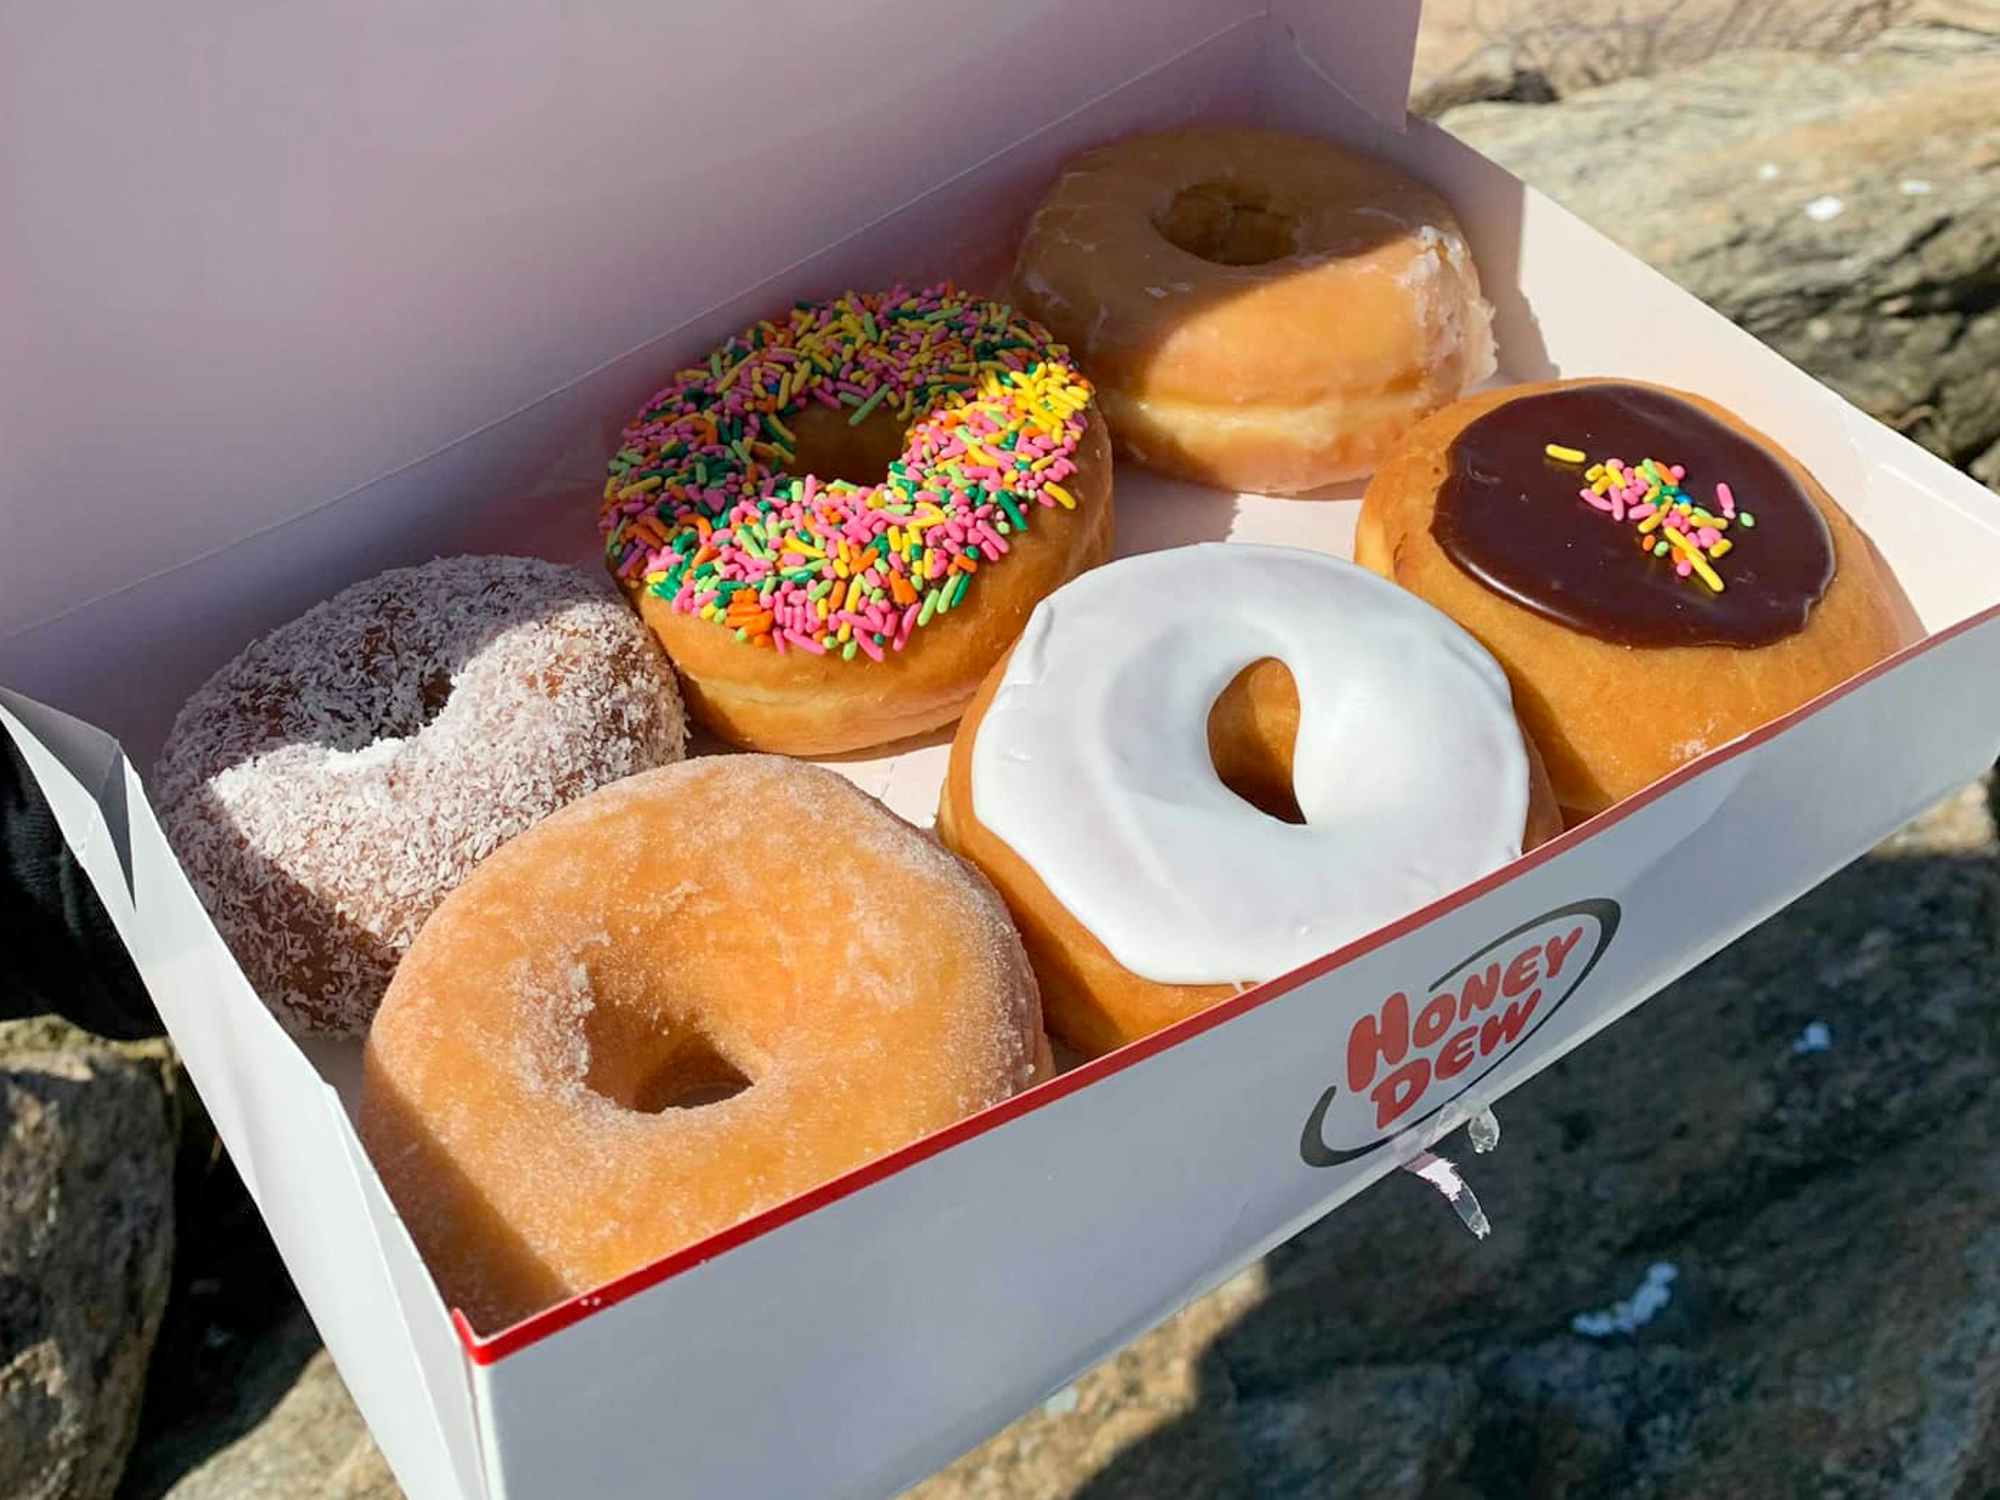 A box of doughnuts from Honey Dew